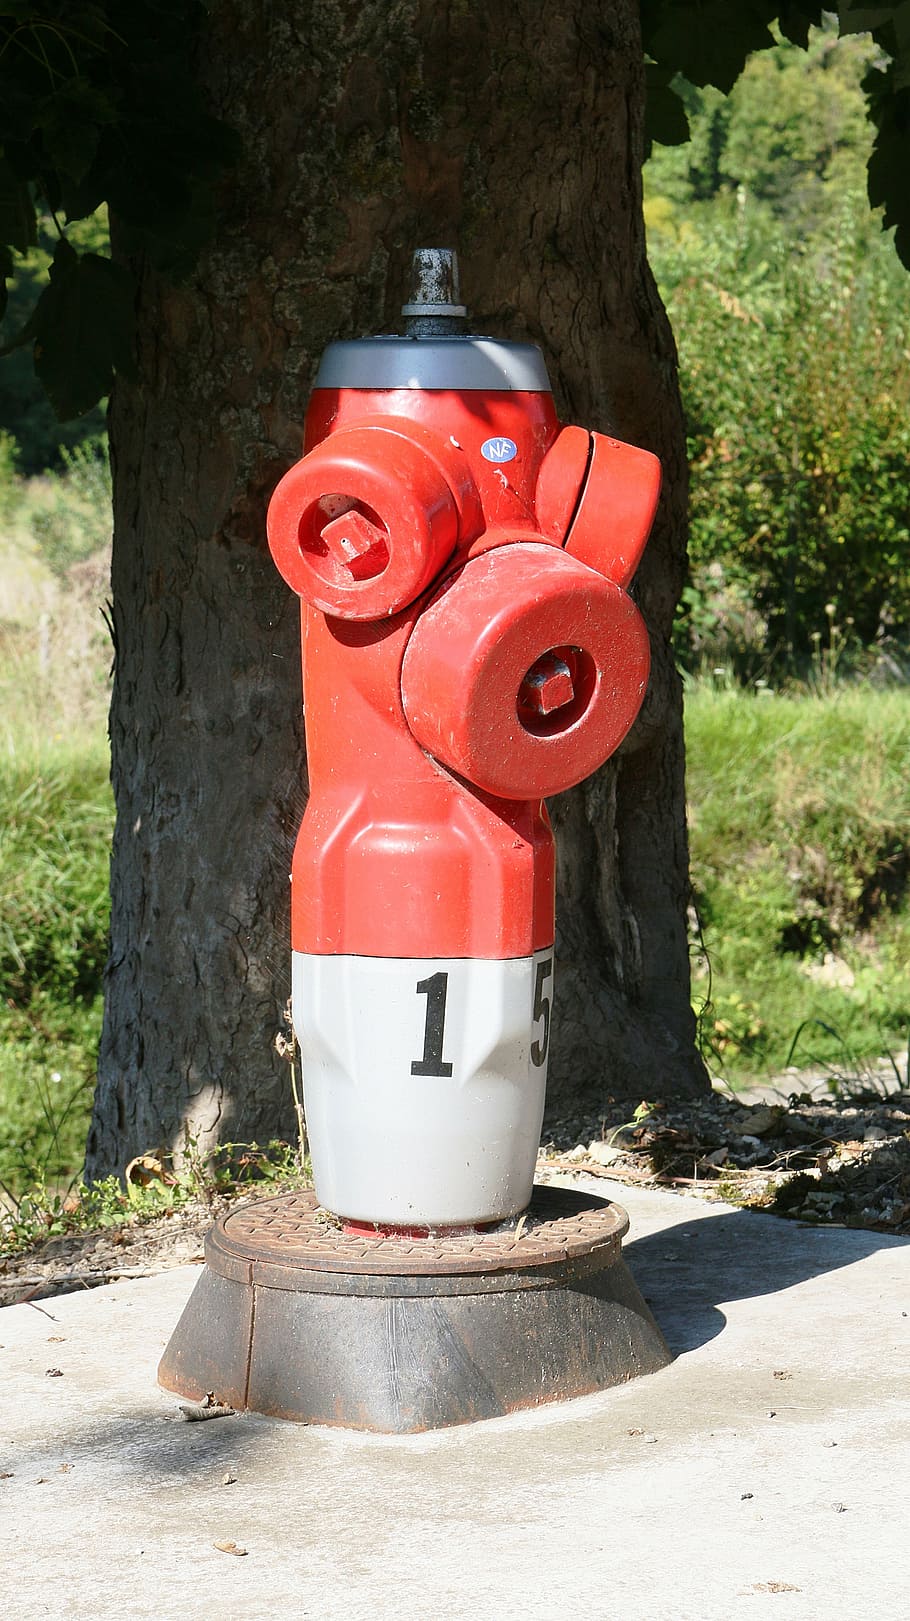 hydrant, fire hydrant, water, firefighter, fire, terminal, urban furniture, red, security, nature